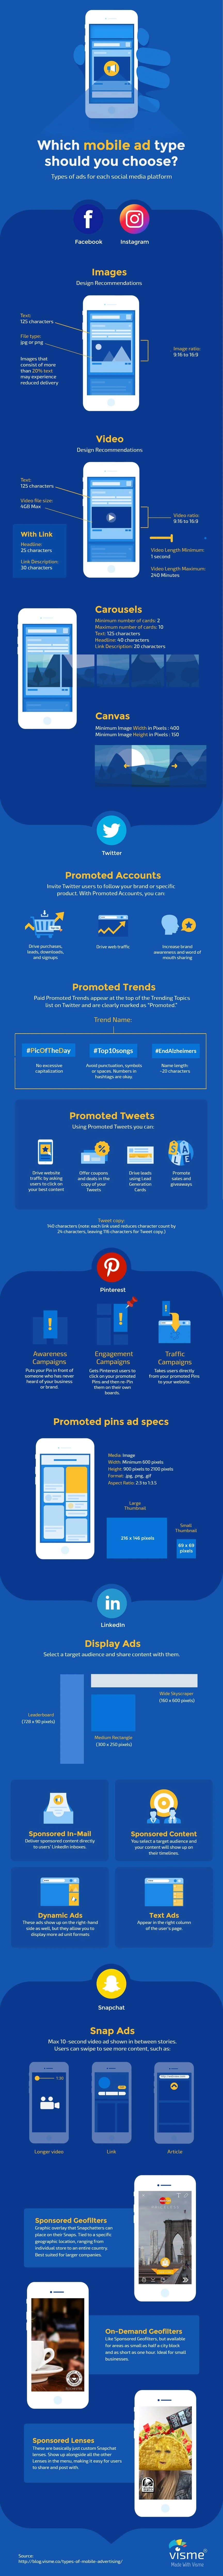 Why You Should Focus Your Marketing Efforts On Mobile Ads and Social Media - #infographic